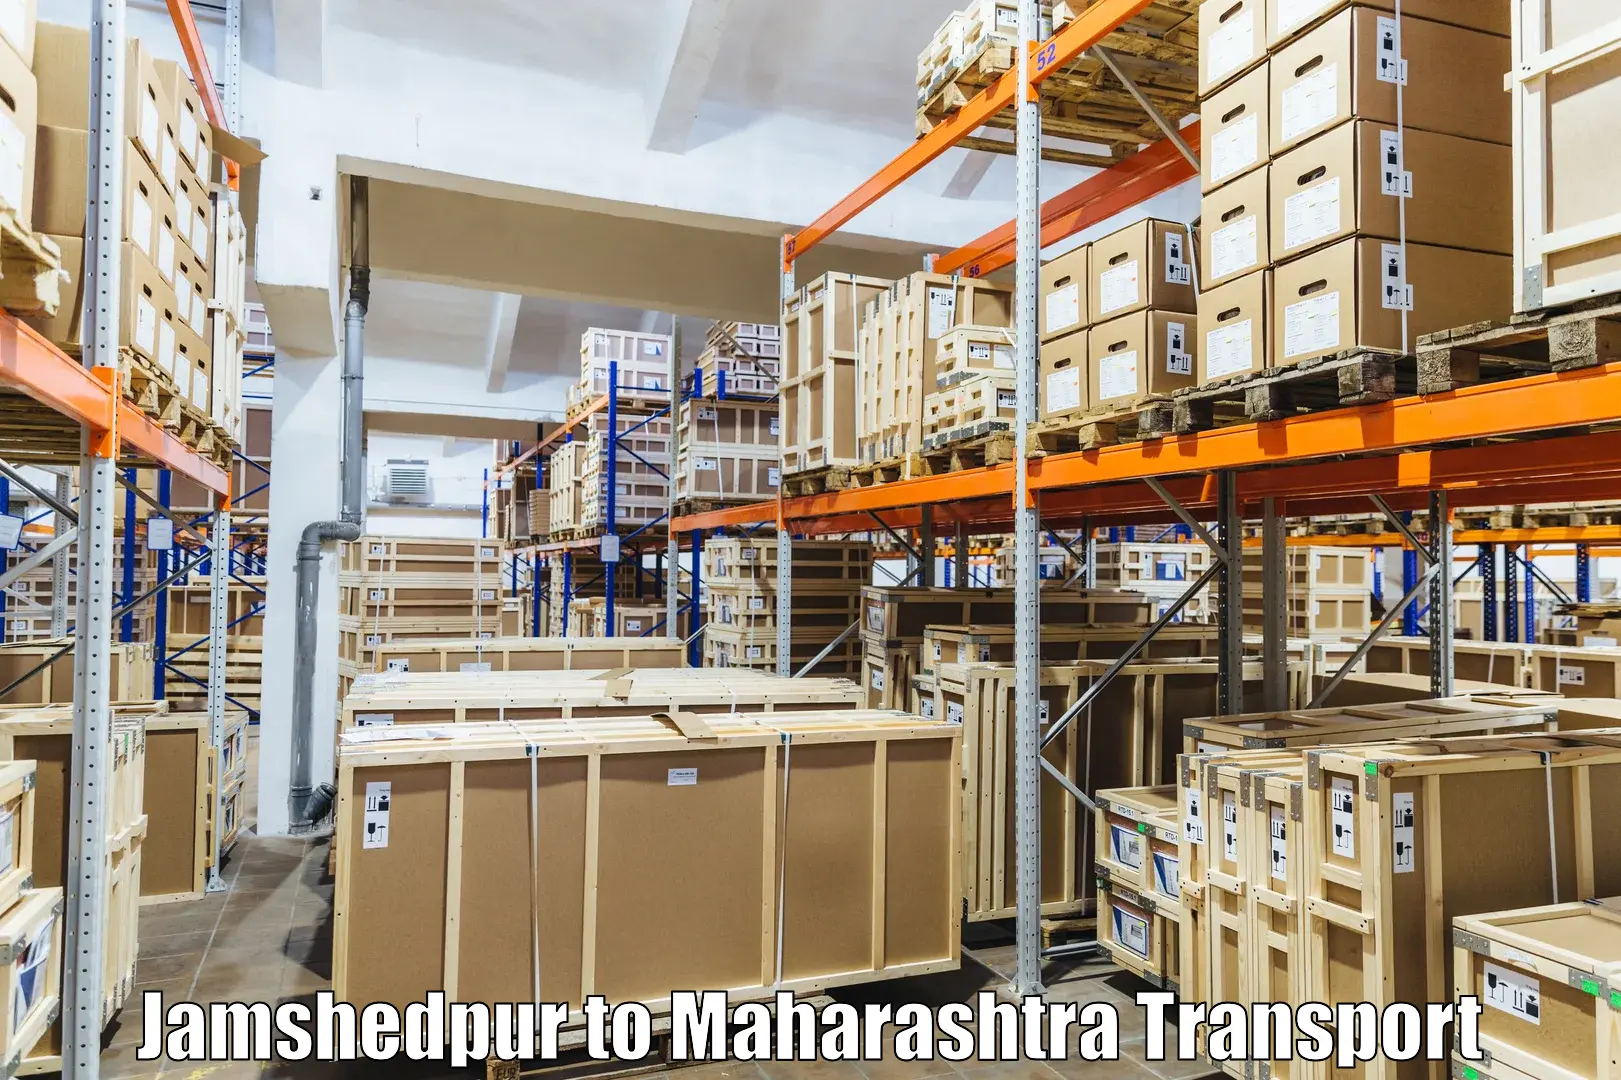 Container transport service Jamshedpur to Worli